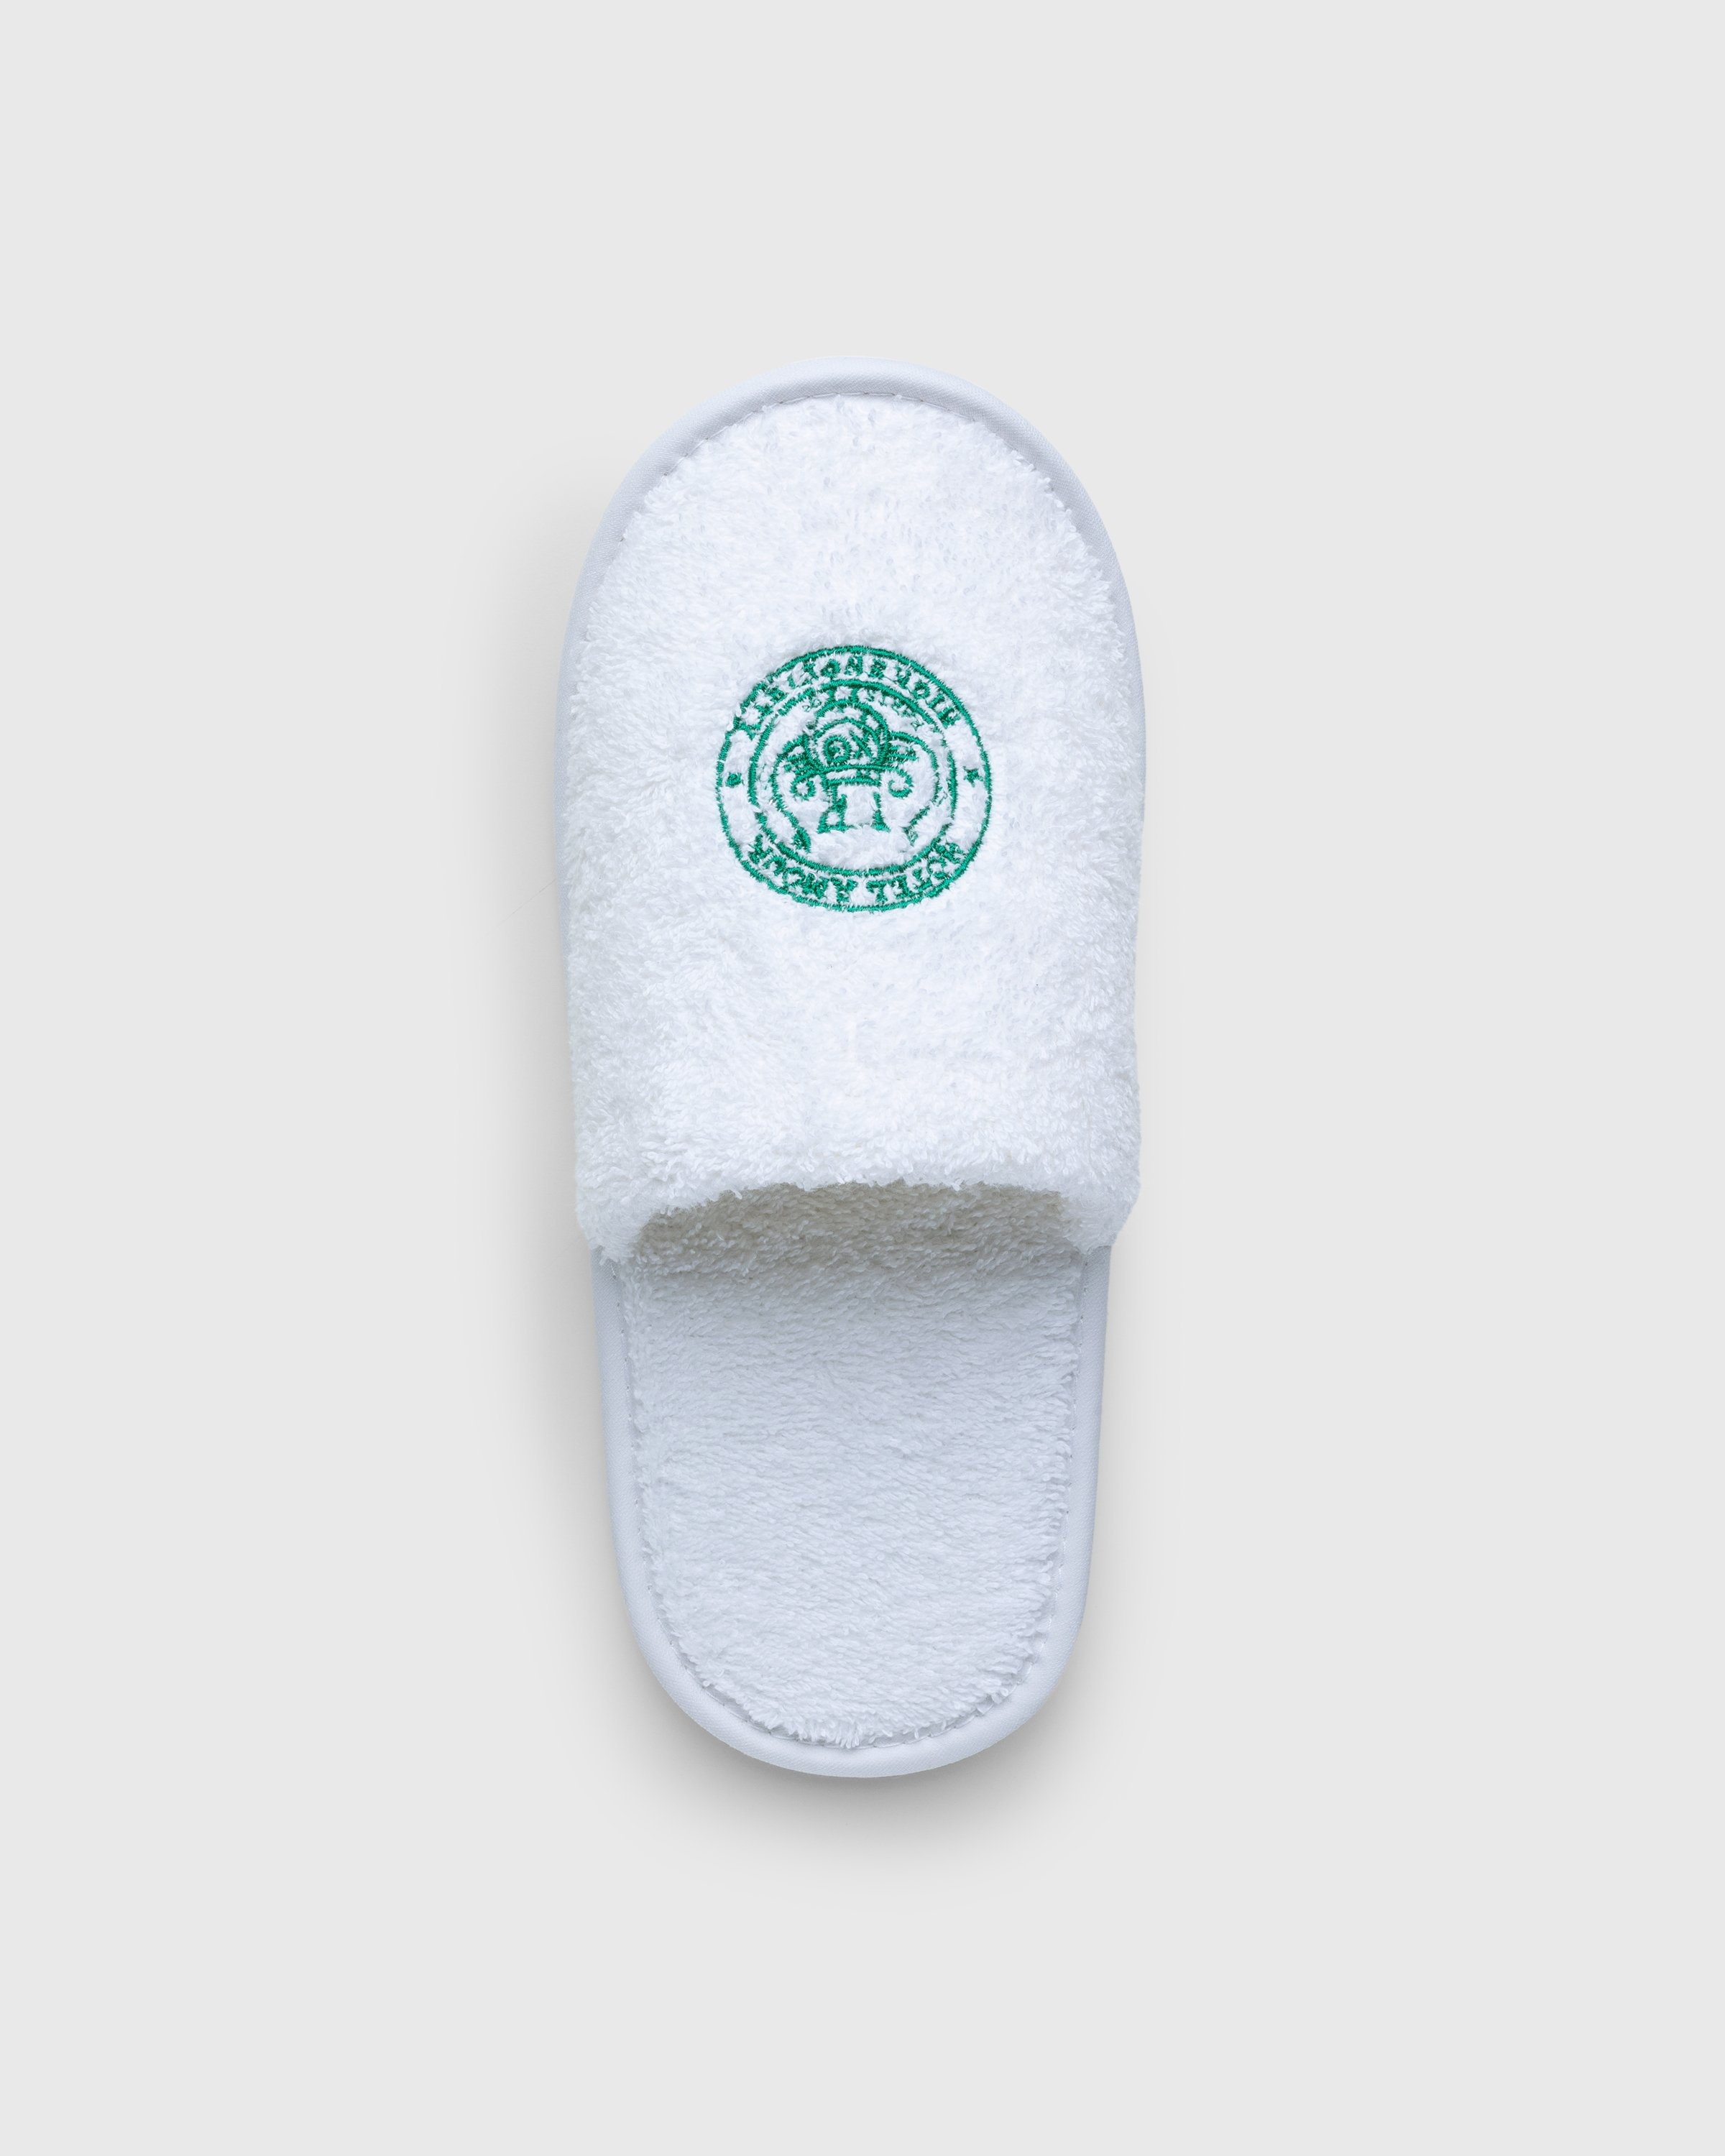 Hotel Amour x Highsnobiety – Not In Paris 4 Slippers White - Sandals - White - Image 1